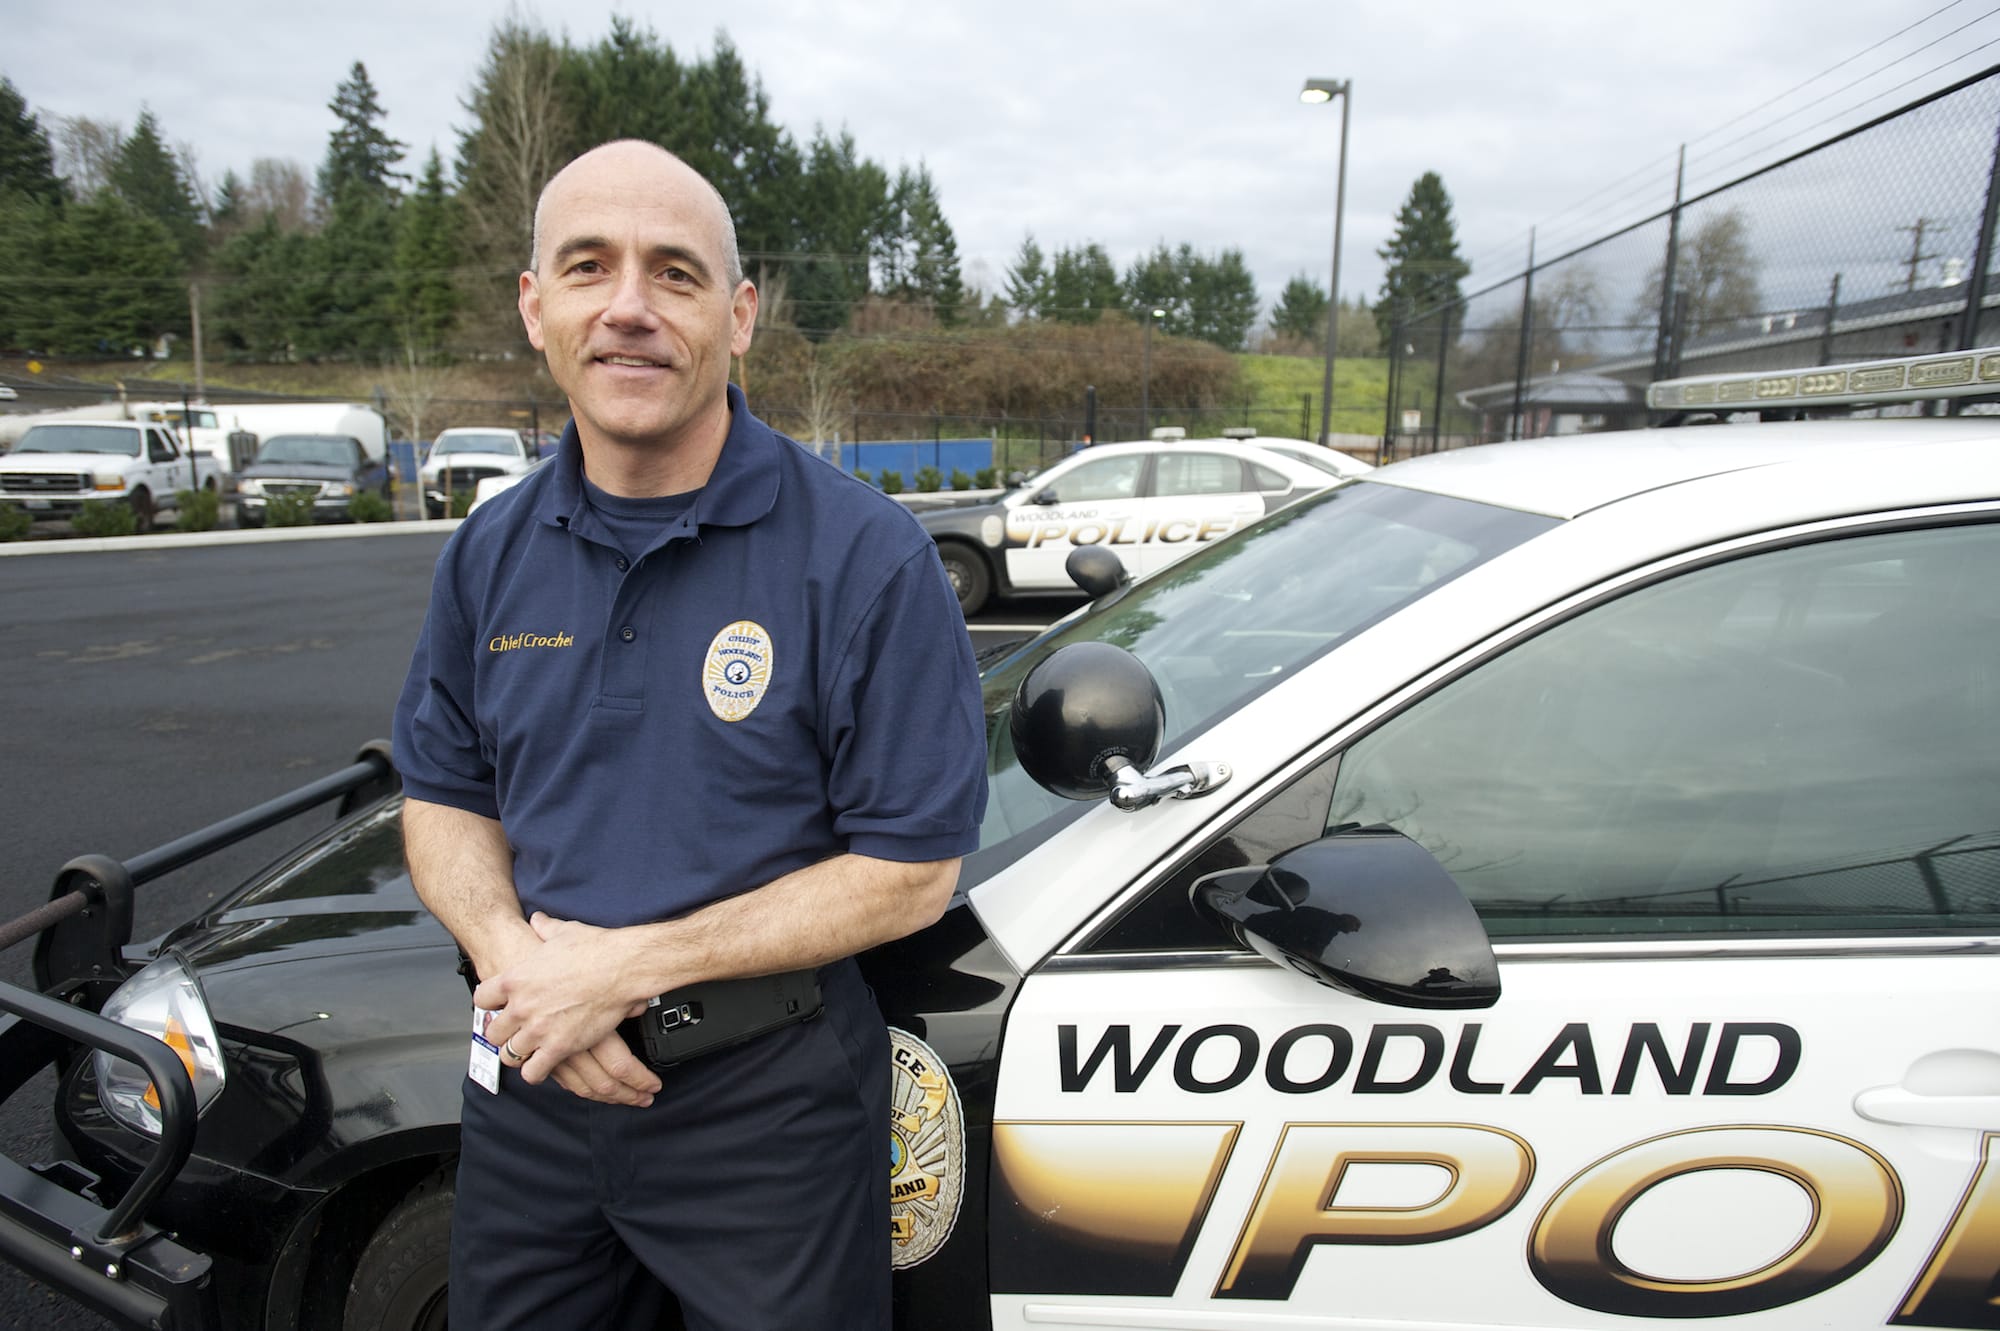 Woodland's new police chief, Phillip Crochet, shown, Wednesday, December 17, 2014, started the job this month.